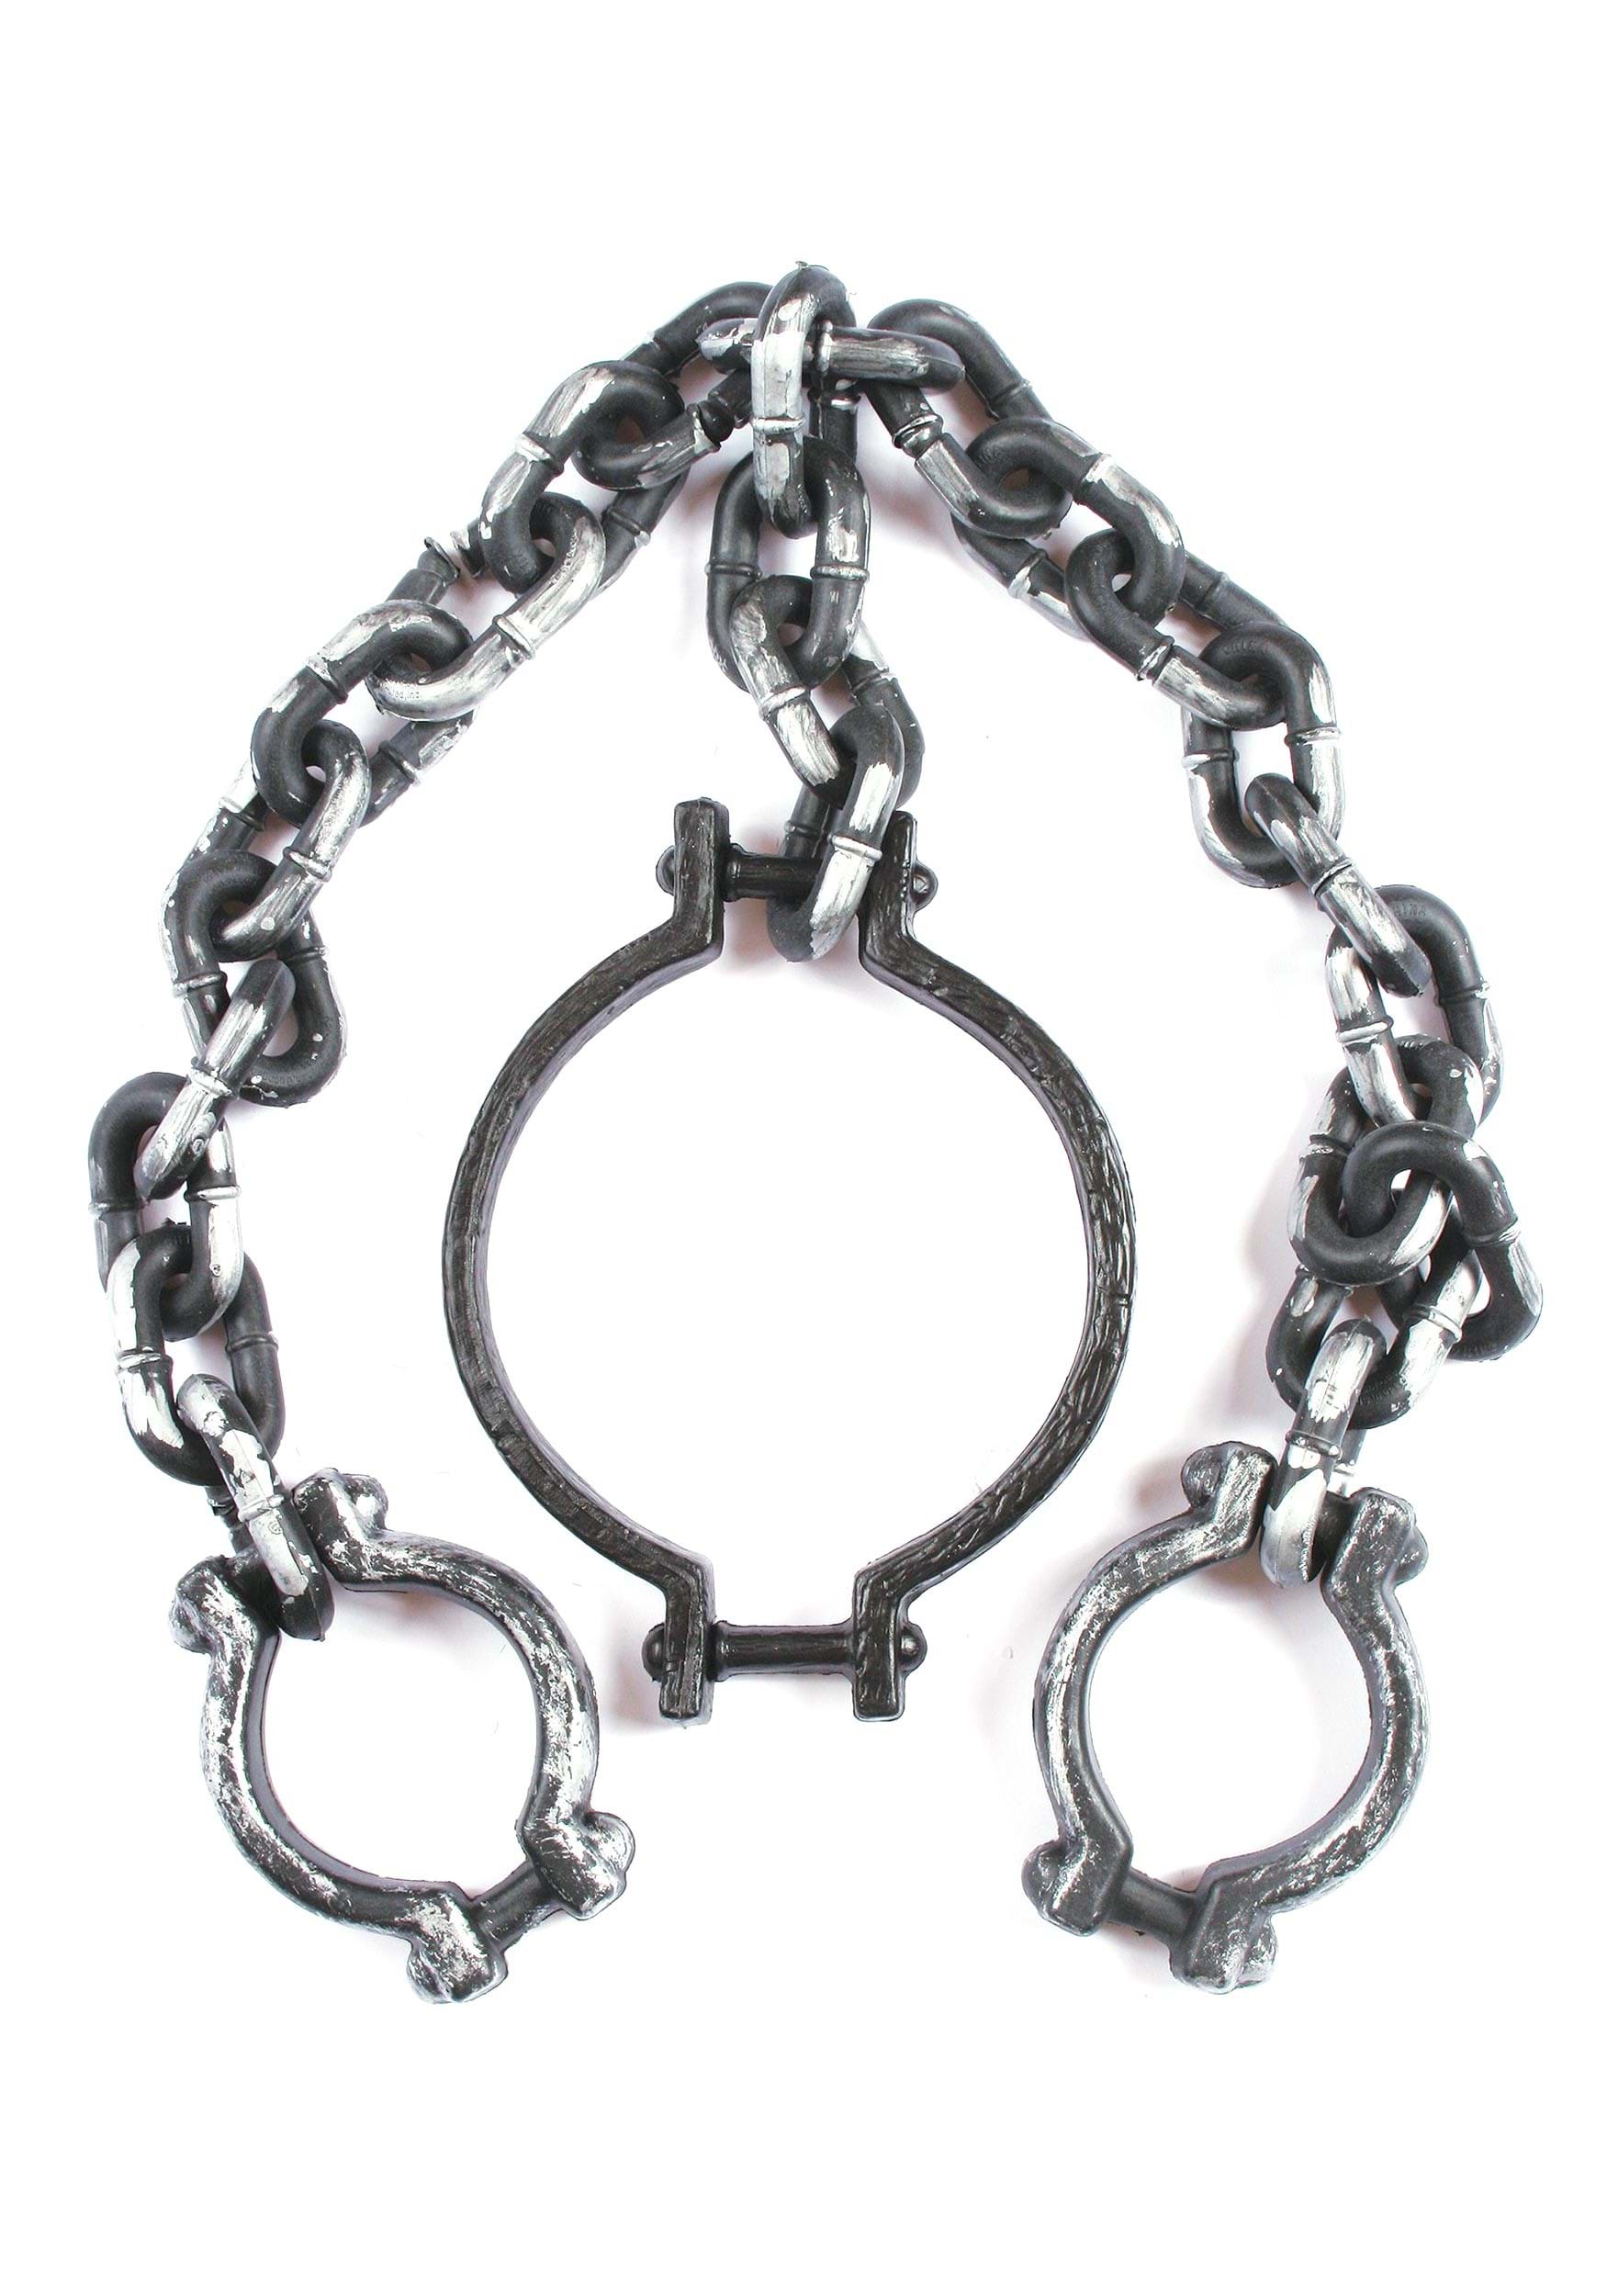 Shackle And Leash With Chain